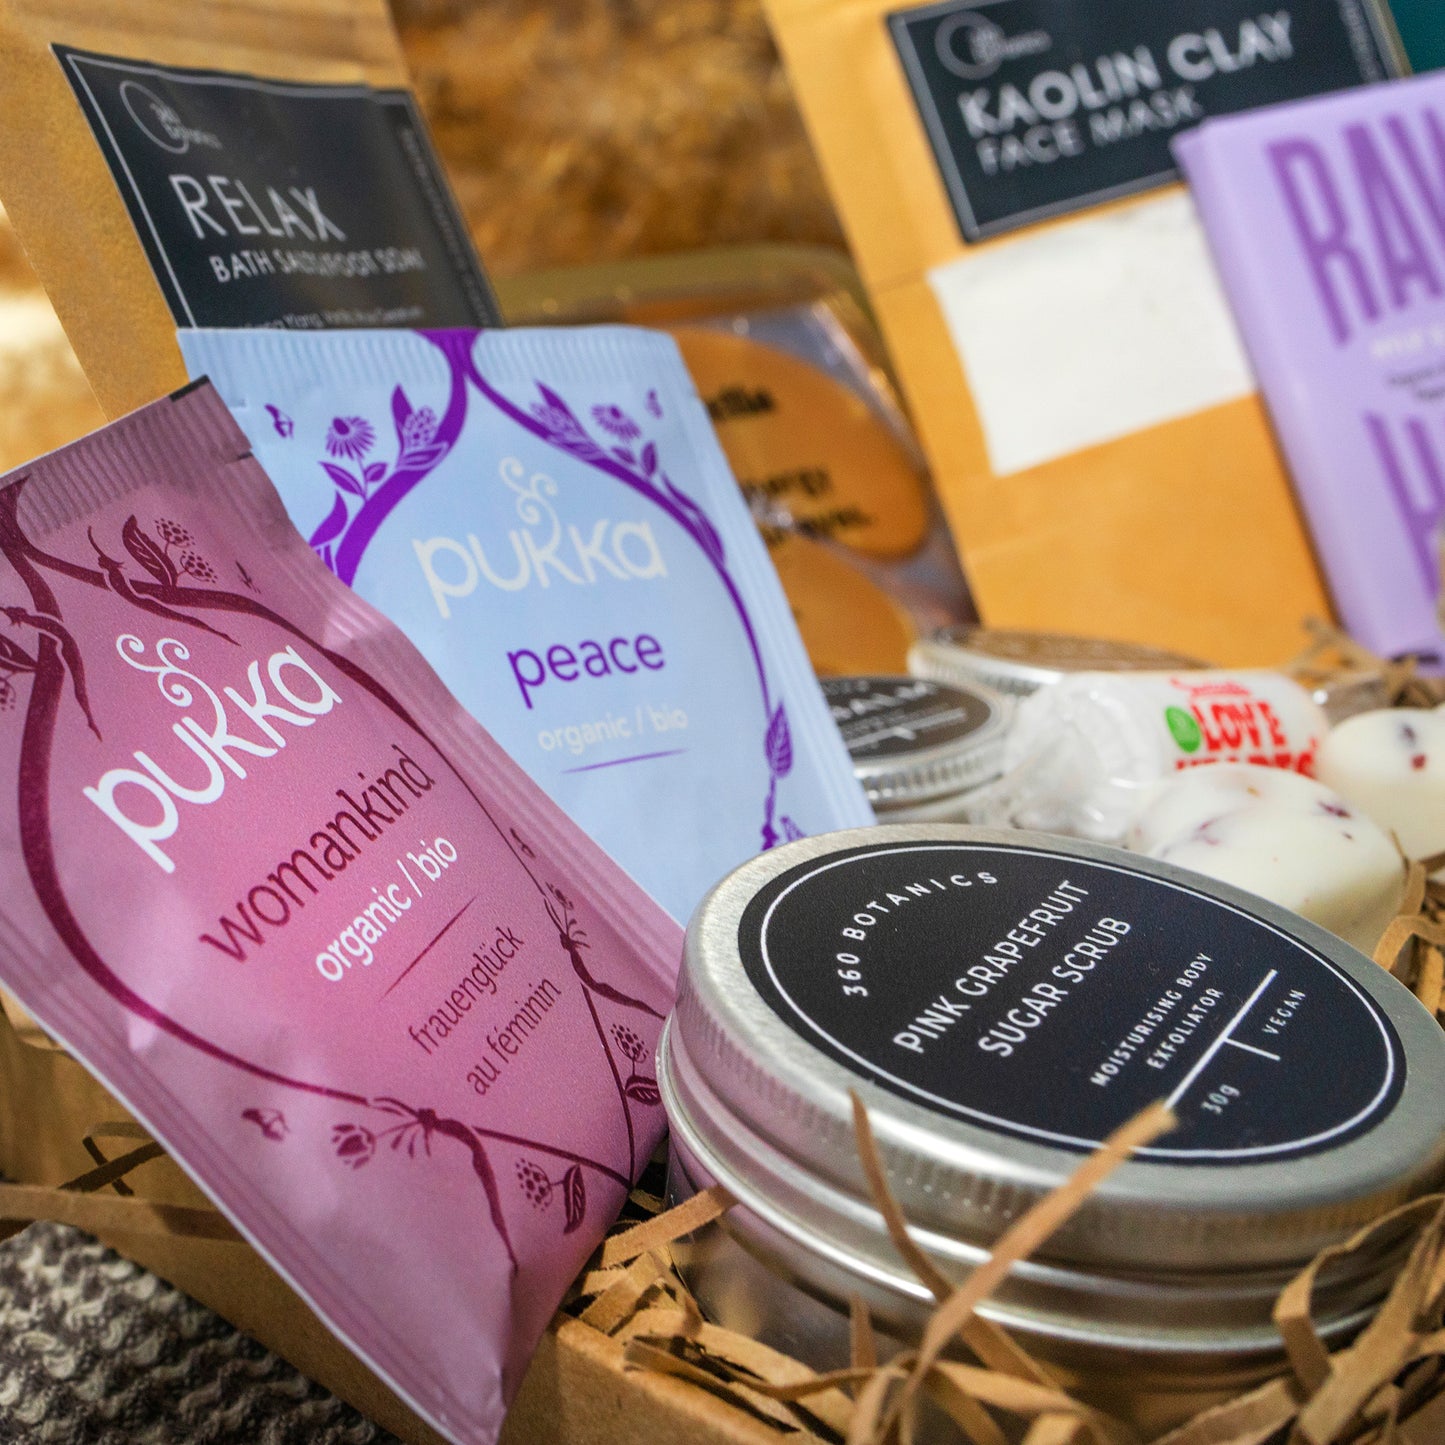 An angled view of a 360 Botanics wellness gift set showcasing a variety of products. In the foreground is a tin of Pink Grapefruit Sugar Scrub alongside sachets of Pukka organic teas in 'Womankind' and 'Peace' blends. Part of a 'RELAX Bath Salts/Foot Soak' pouch and 'KAOLIN CLAY Face Mask' are visible in the background, all artfully arranged in a rustic straw-filled box